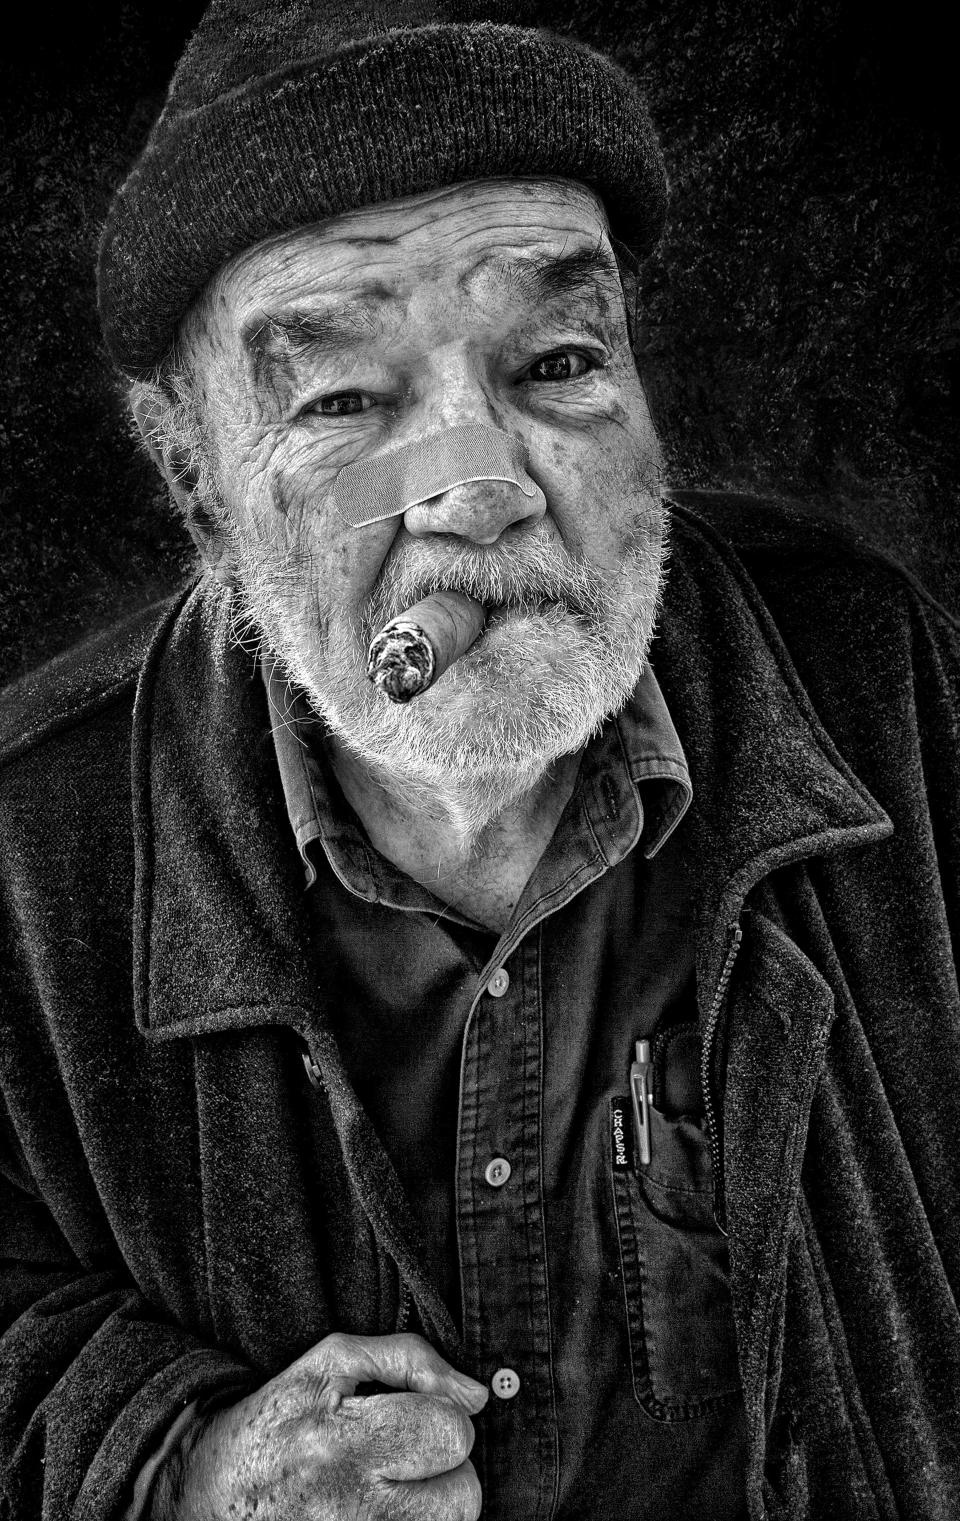 "Portland Frank" from the series, "Men of a Certain Age."